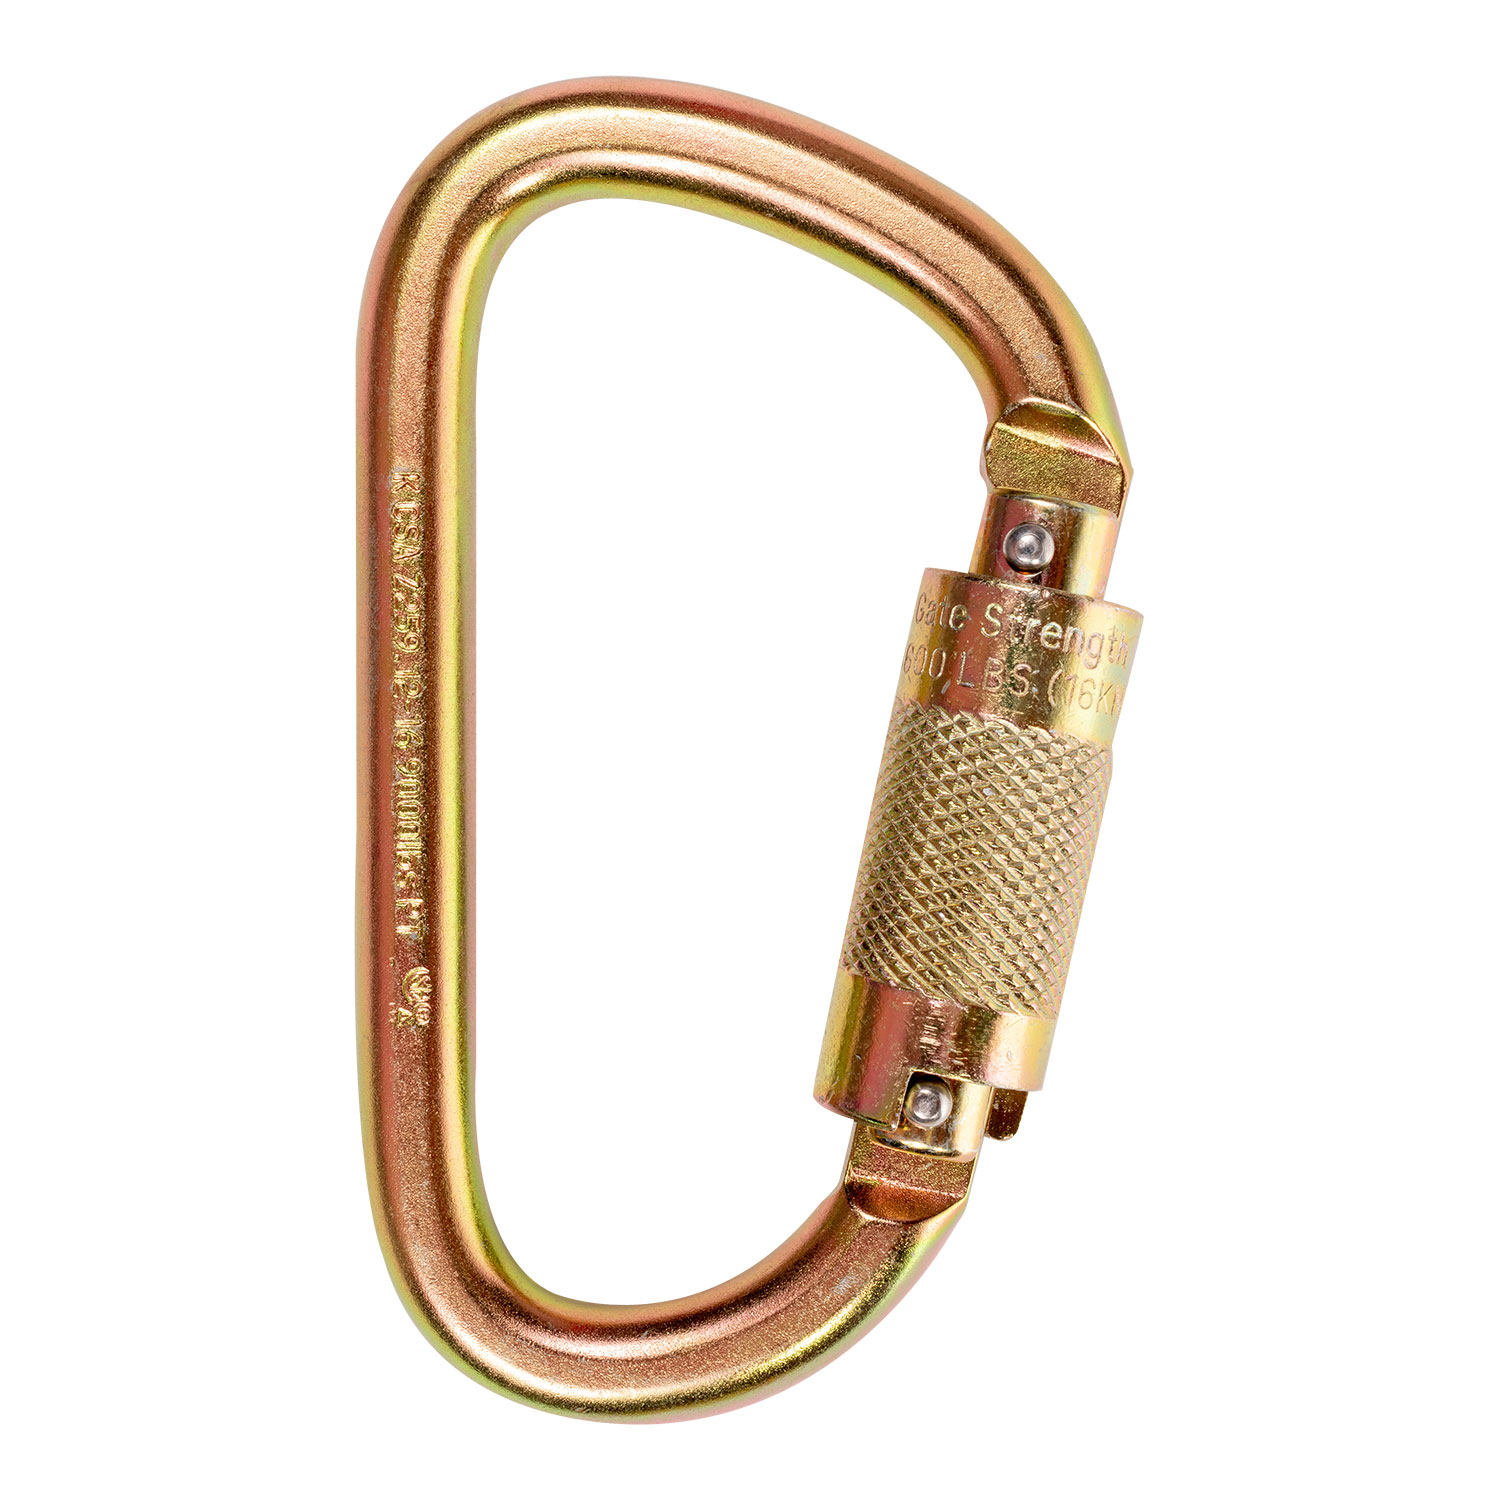 KStrong Small Steel Carabiner (ANSI), .84" Gate Opening, UFC401100